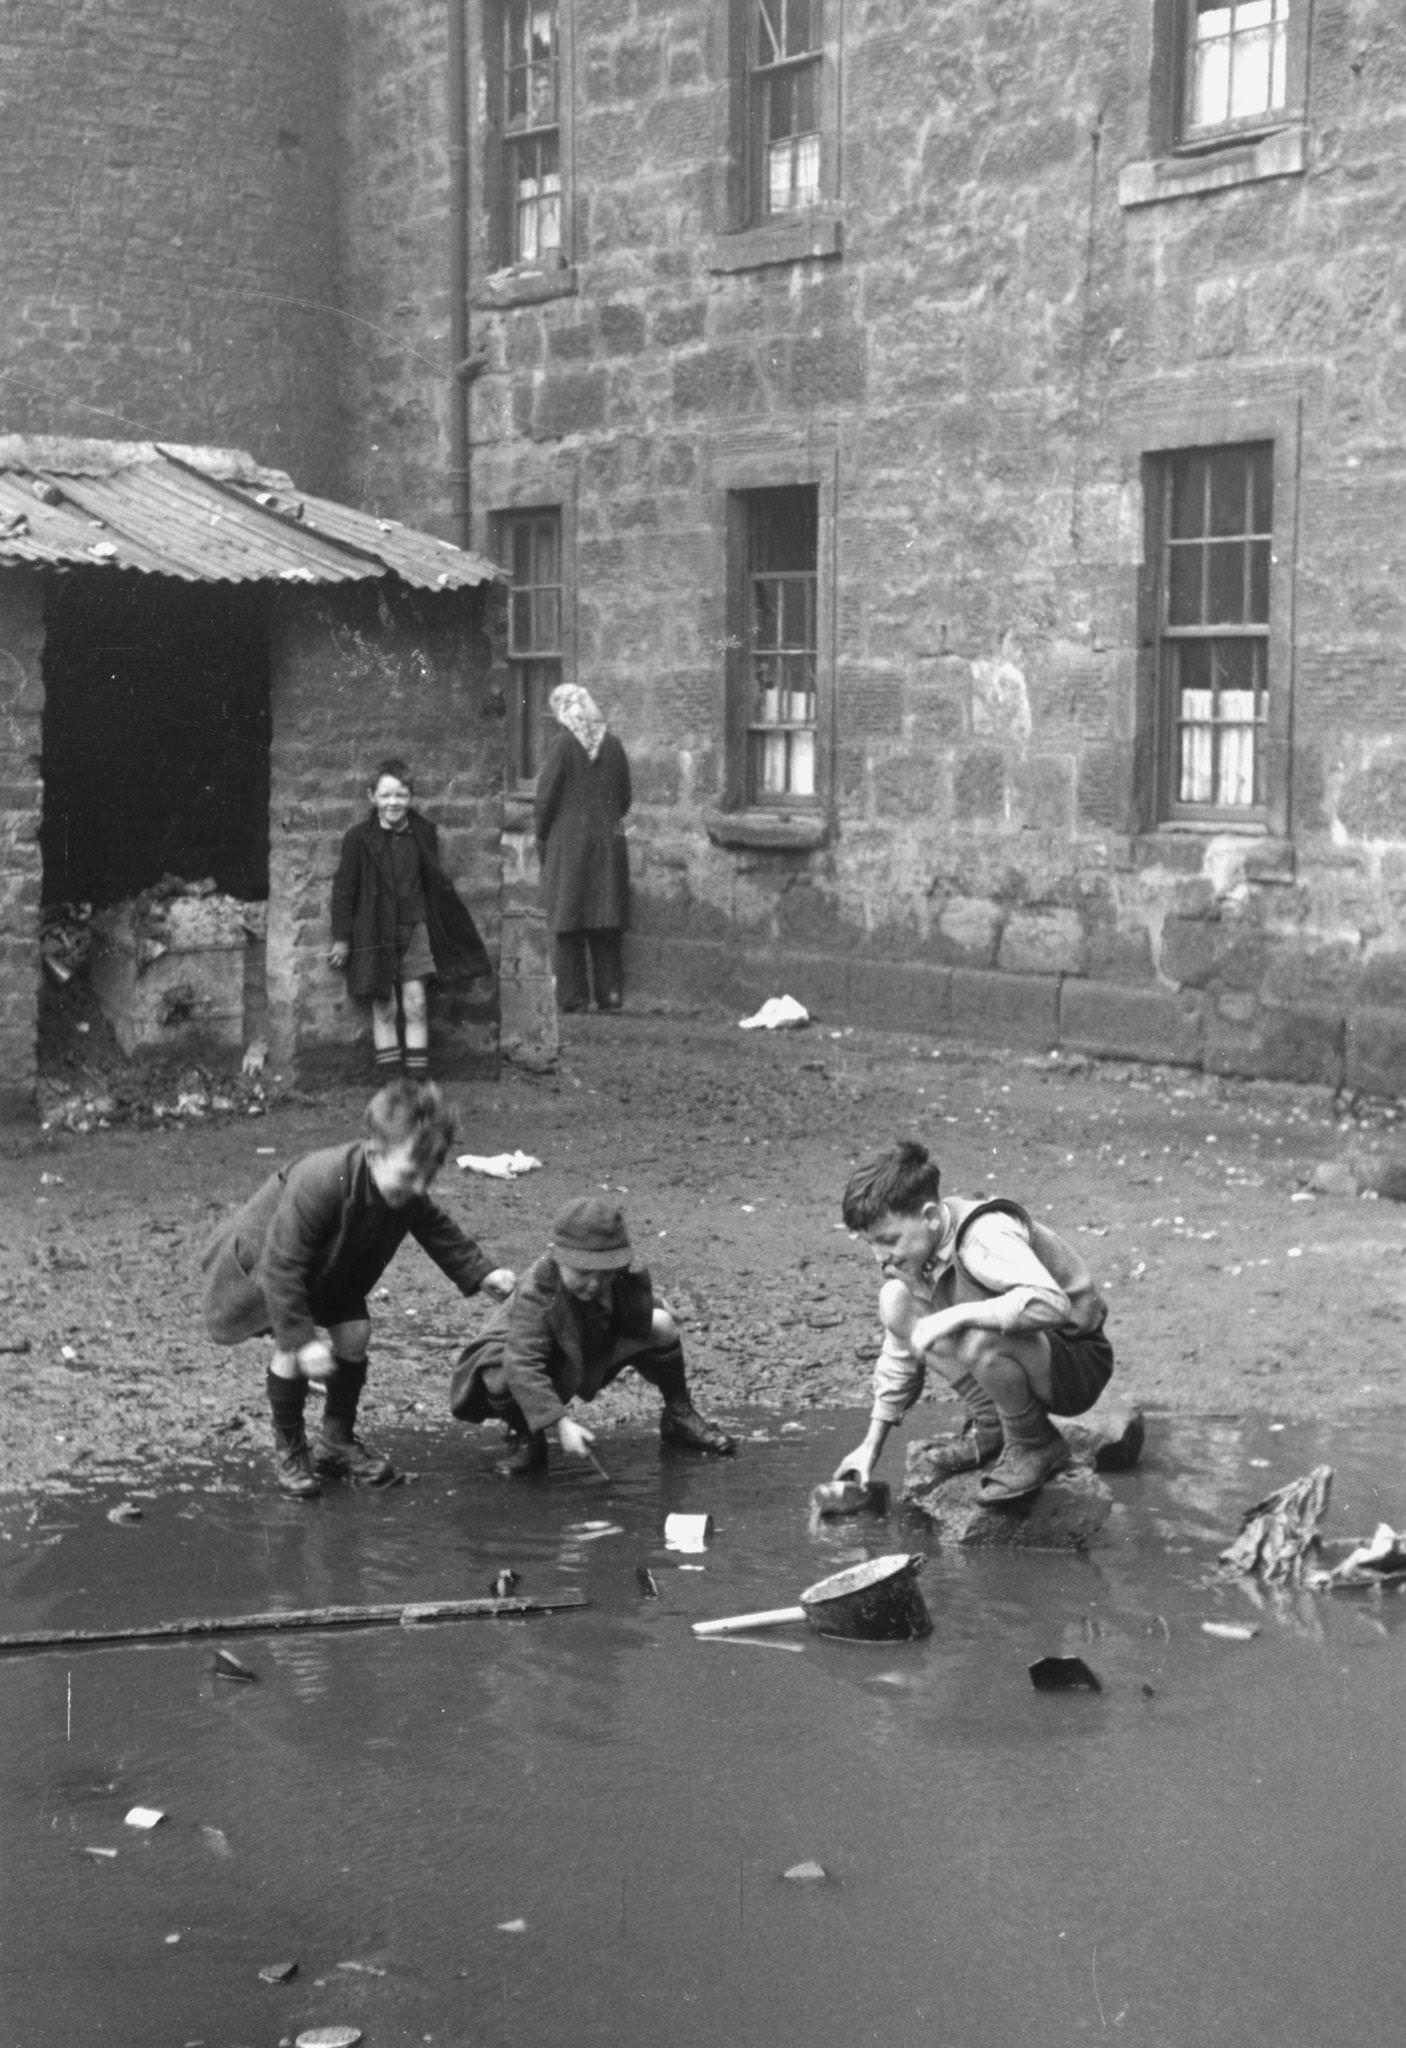 Children playing in a puddle in the Gorbals, a slum distict of Glasgow with graffiti on the walls and muddy pools and rubbish littering the back yards, 1948